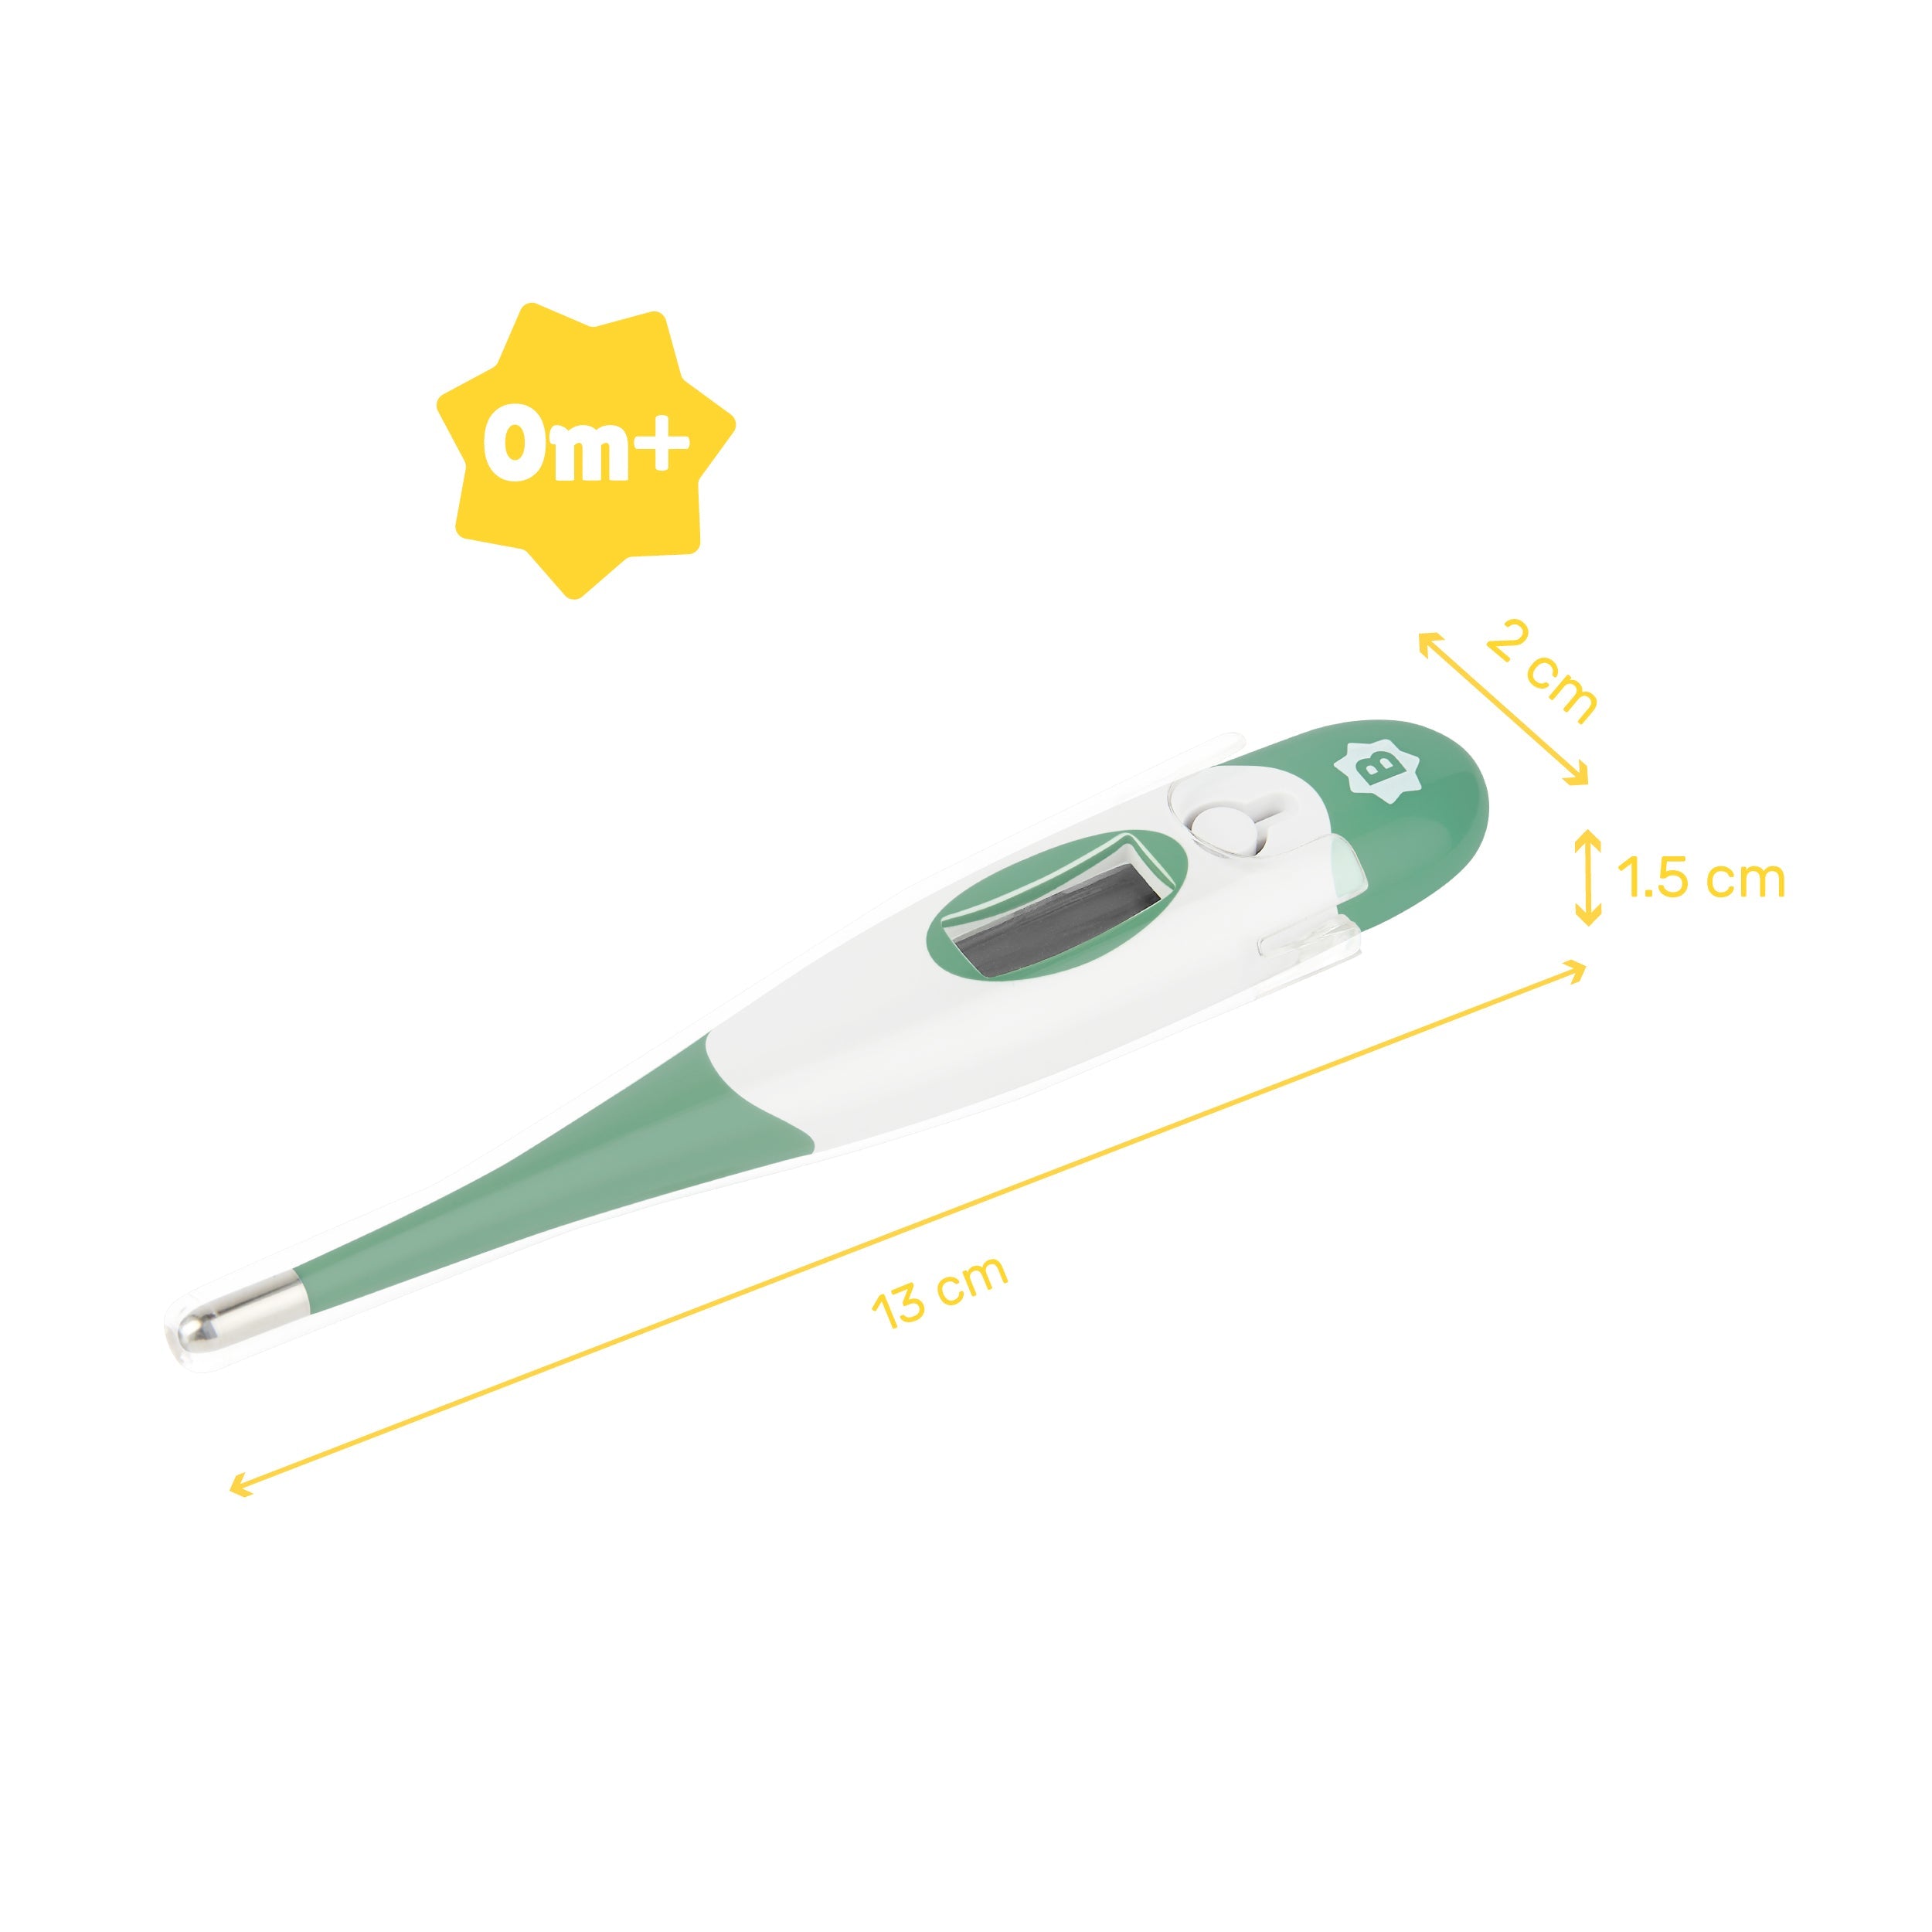 Ultrasnelle thermometer